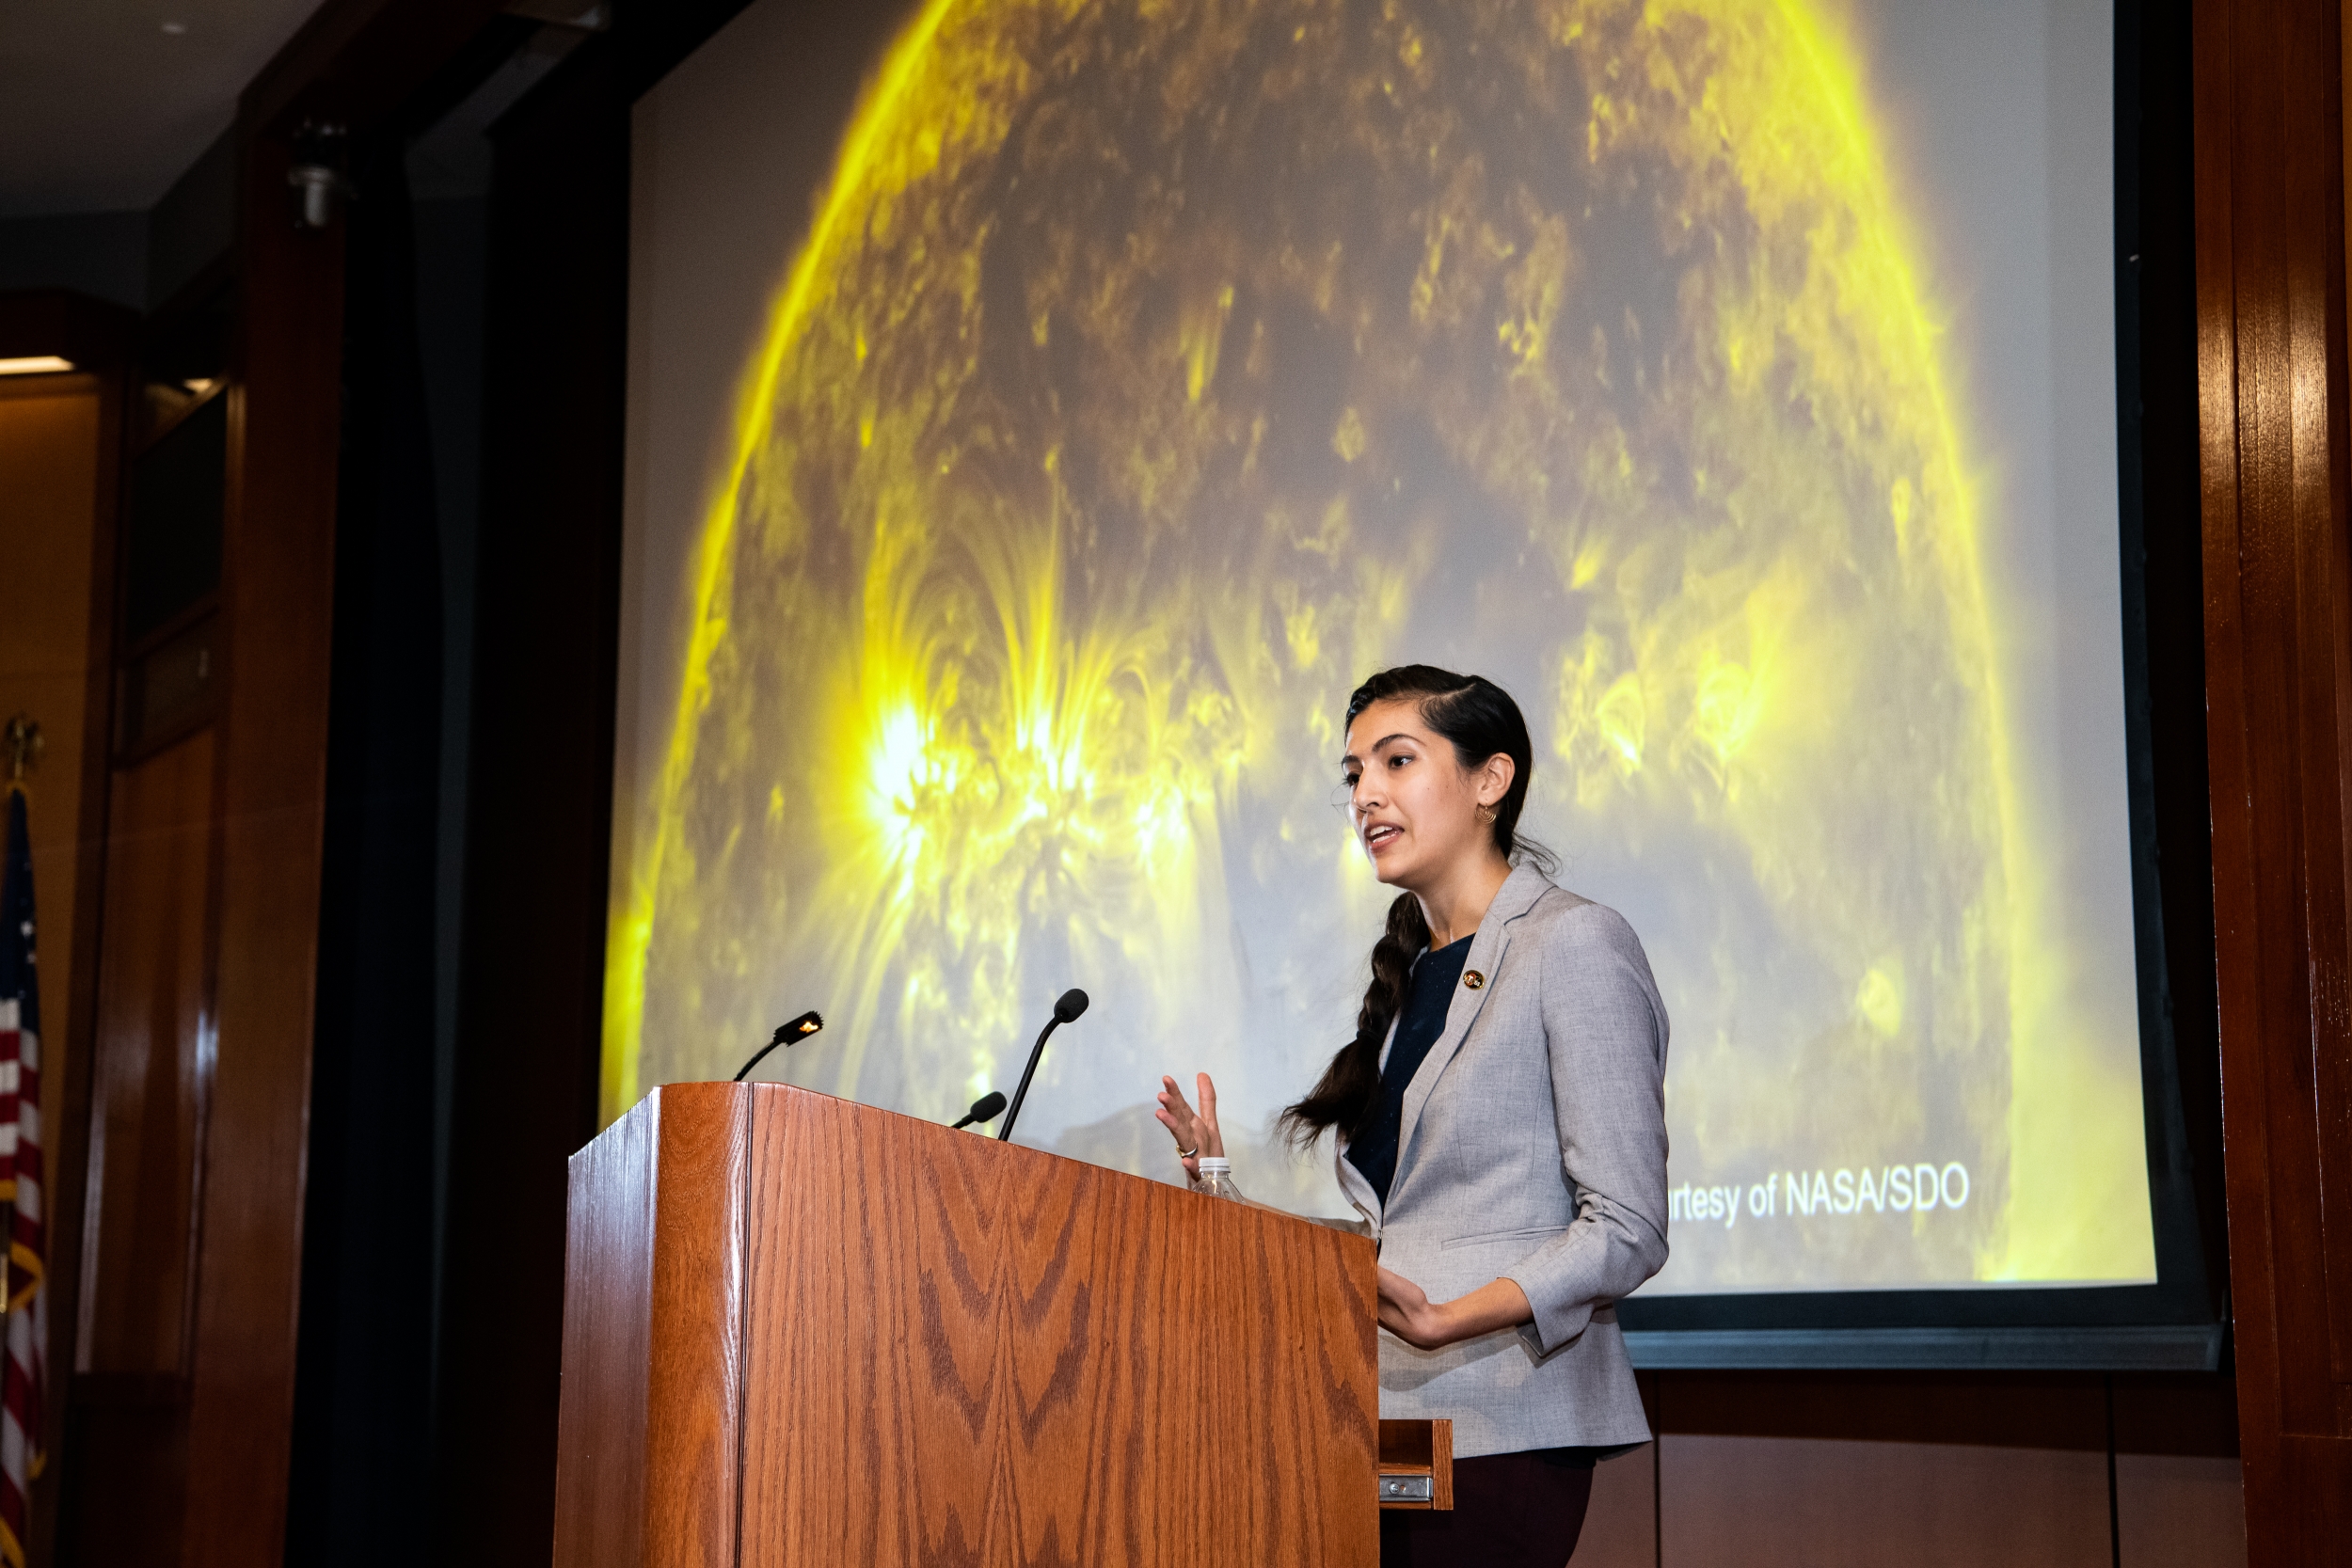 Natalia Guerrero stands at the lecturn and gives her keynote speech in front of a large image of a sun